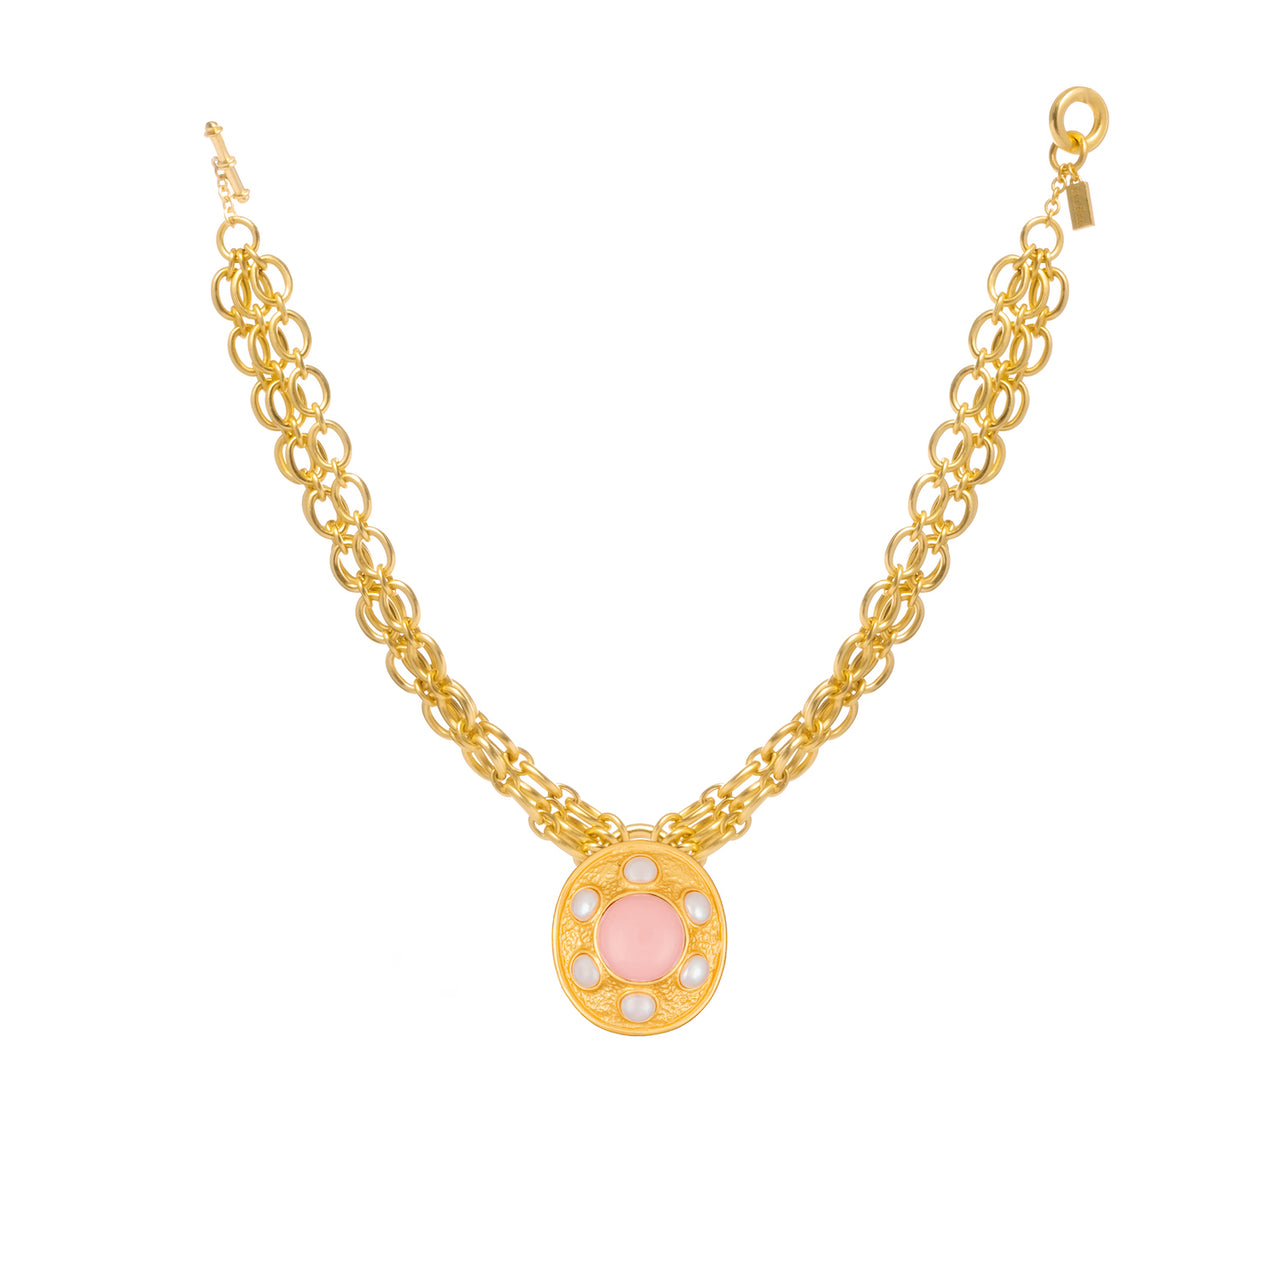 Valere Vivienne Necklace - Pink Coral and Pearl